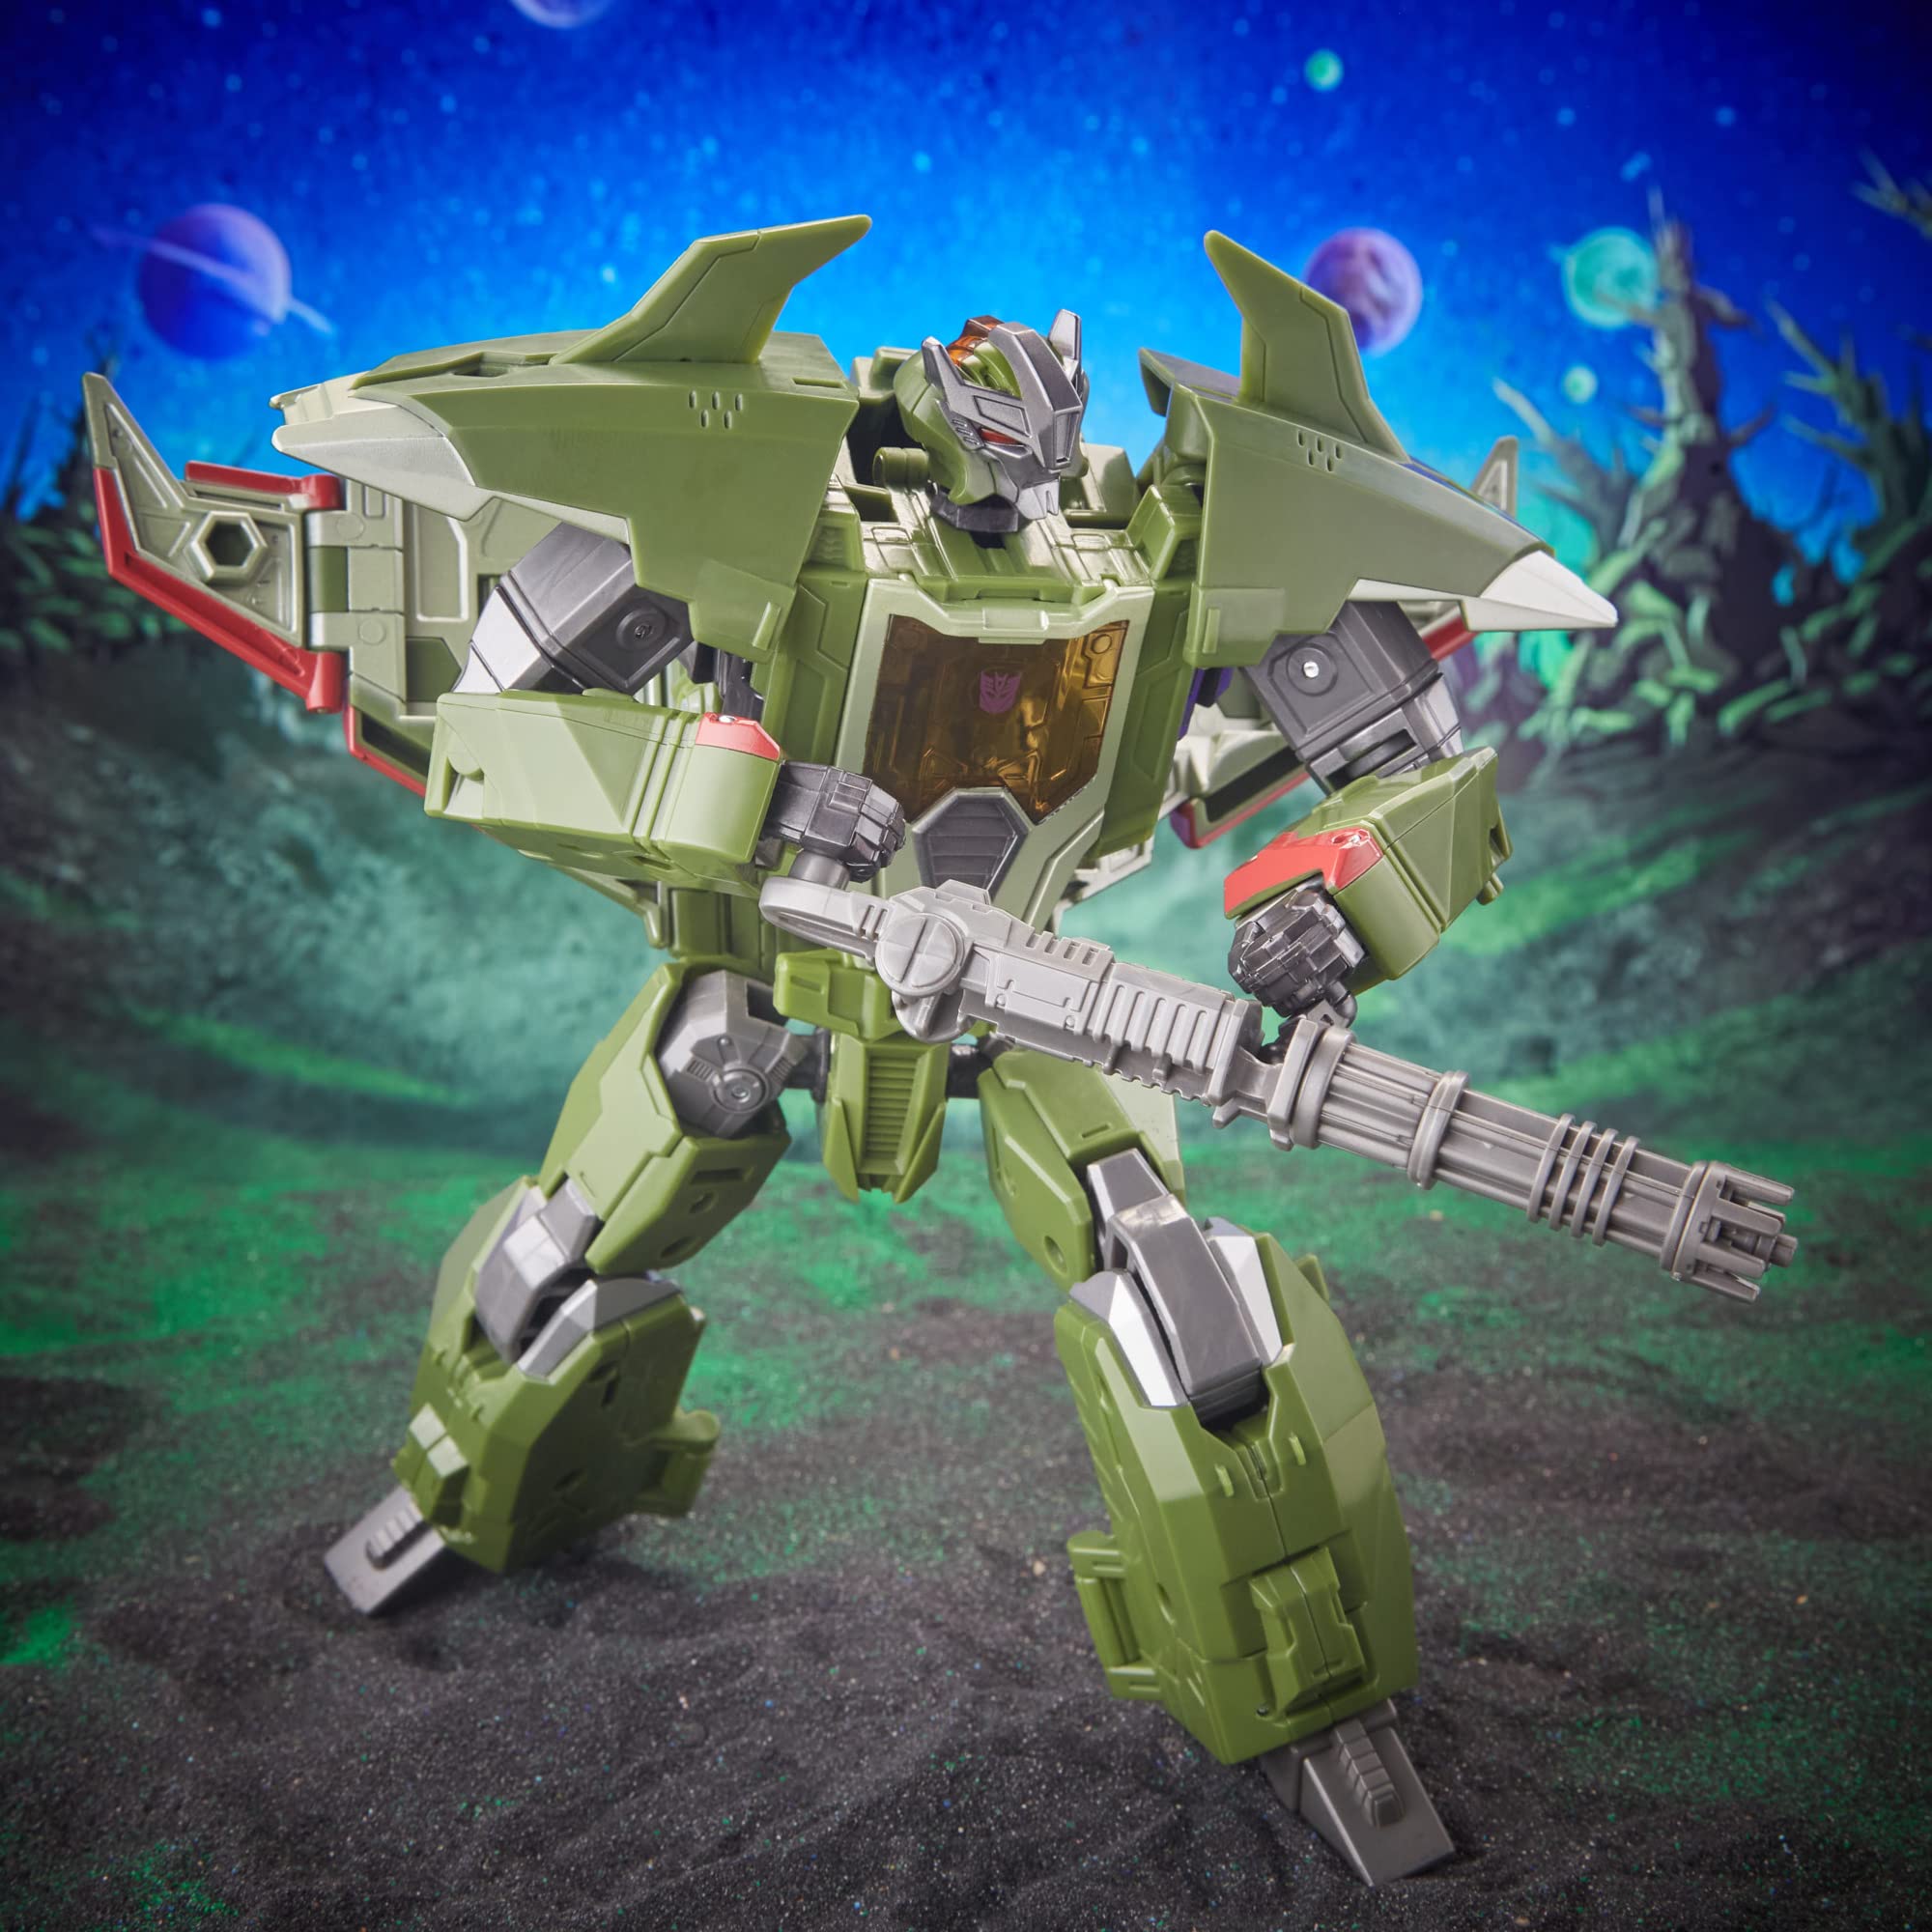 Transformers Toys Legacy Evolution Leader Prime Universe Skyquake Toy, 7-inch, Action Figure for Boys and Girls Ages 8 and Up